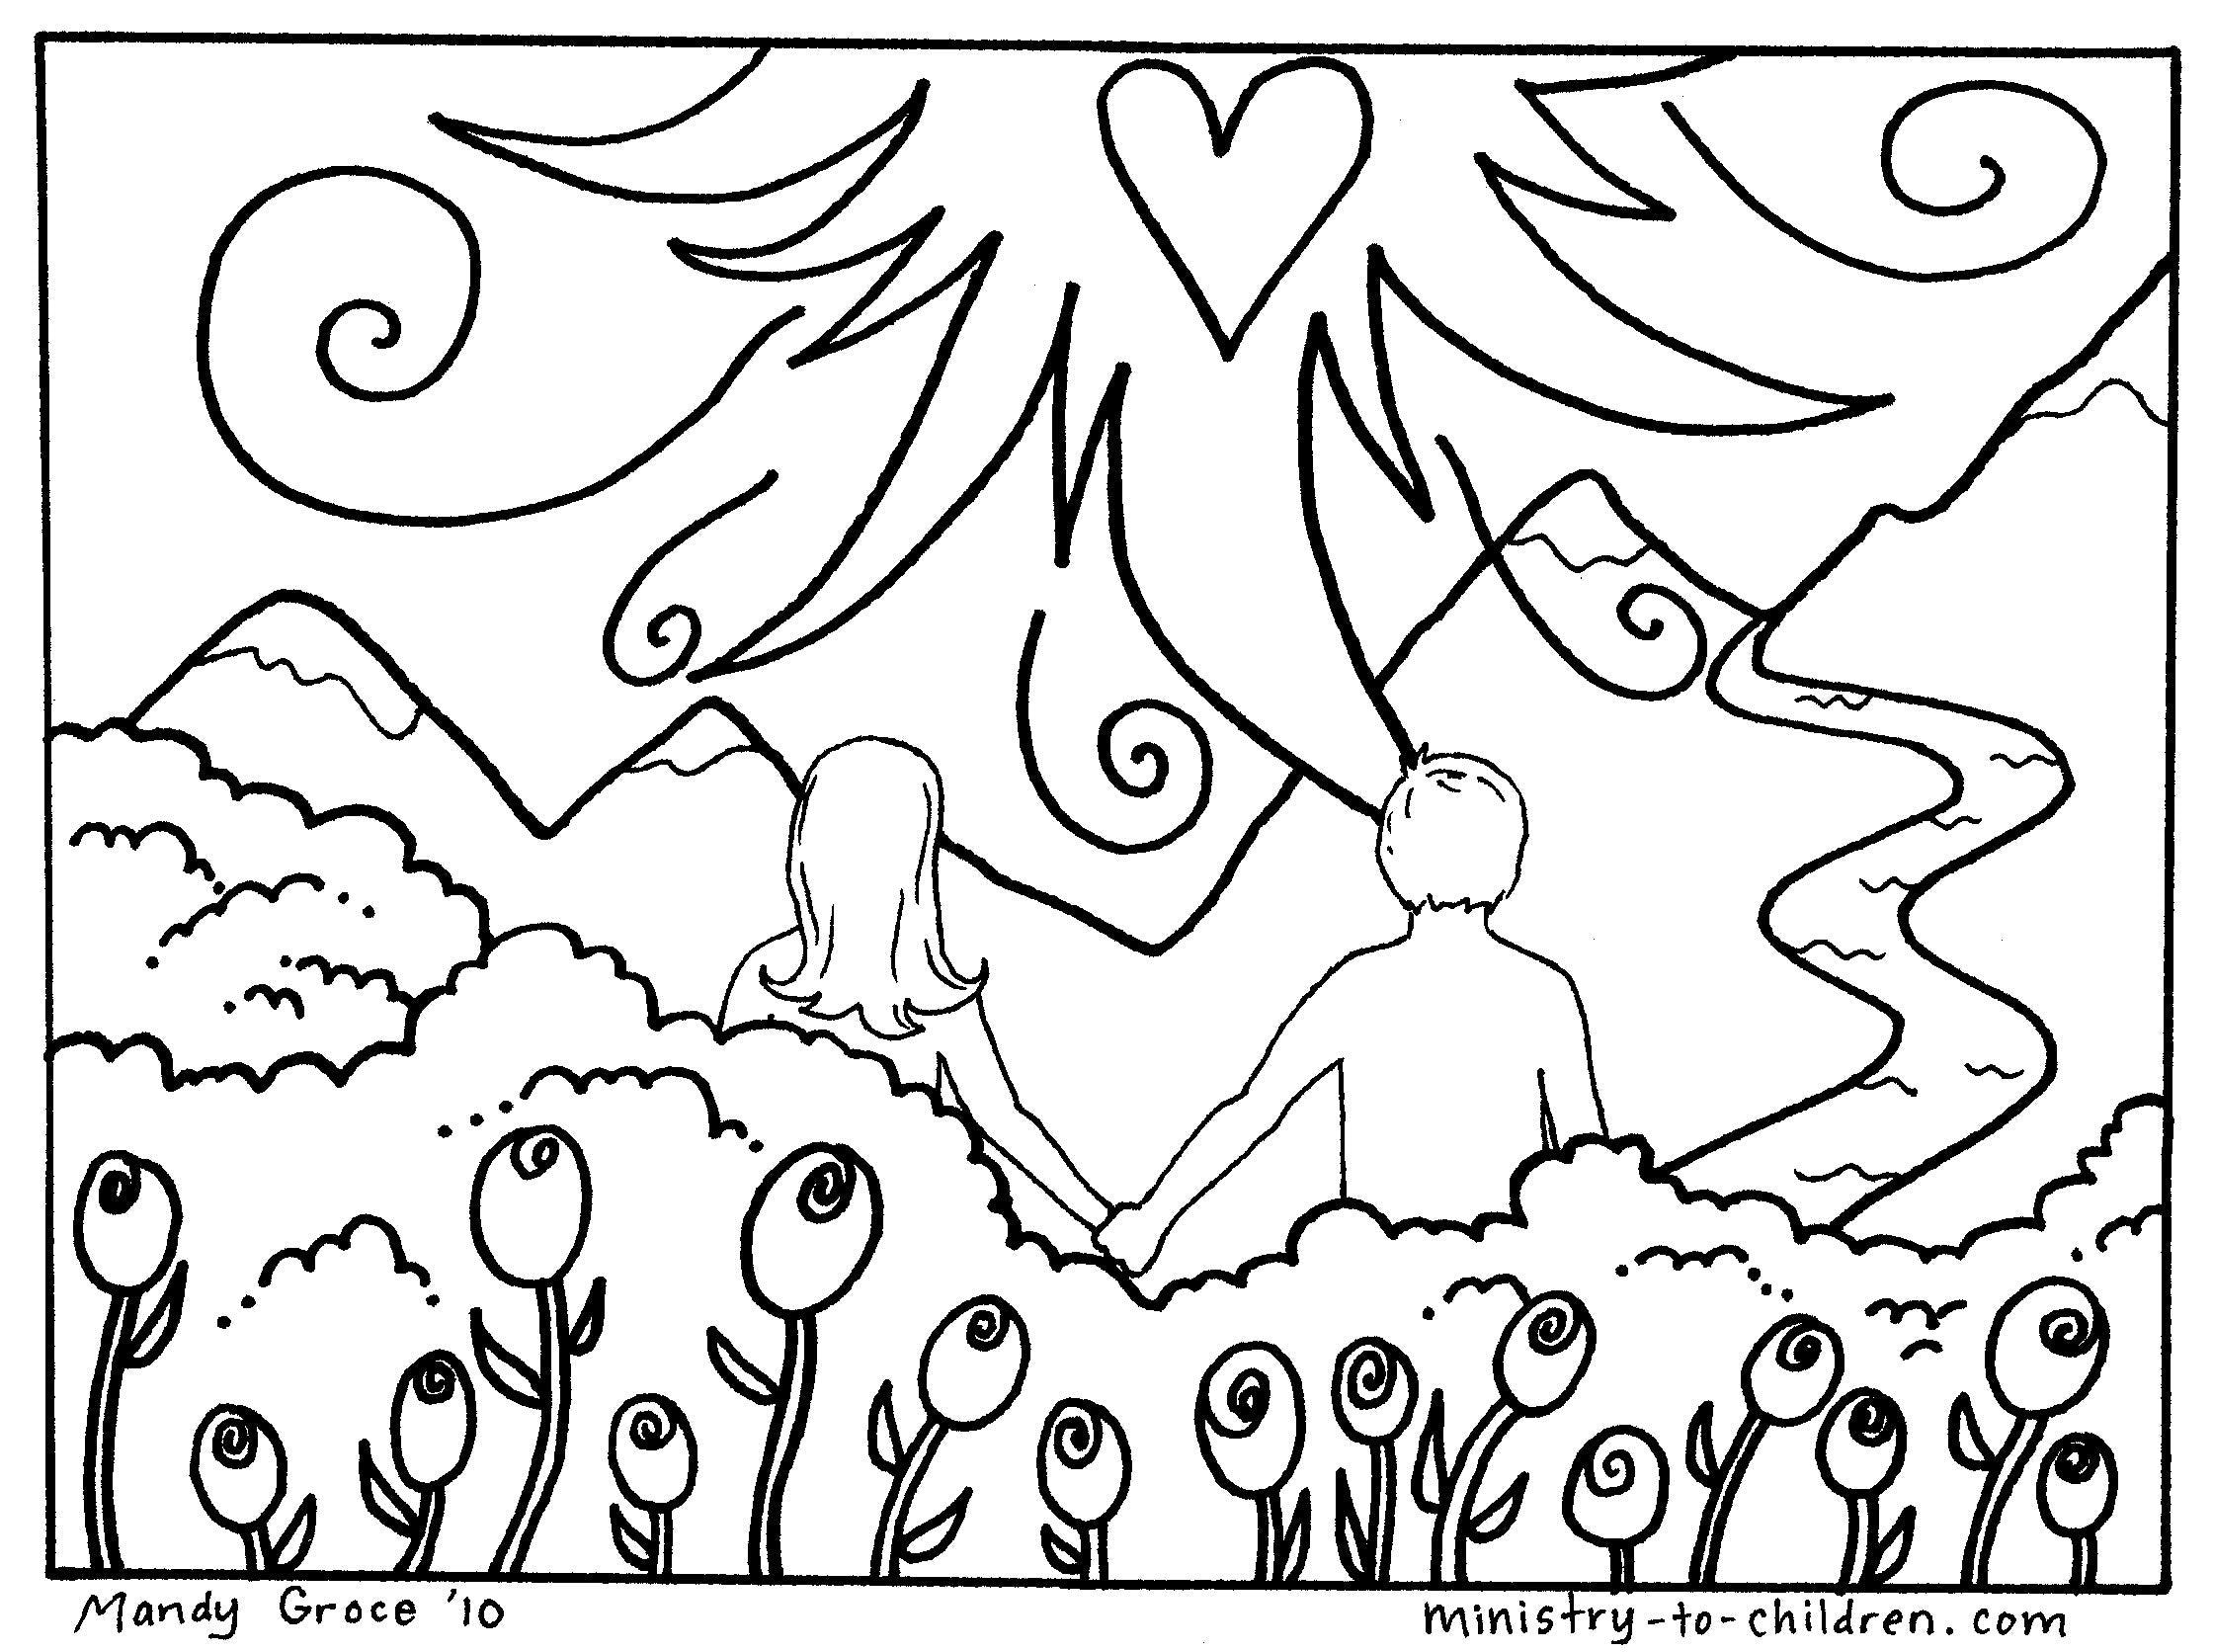 day 2 of creation coloring pages